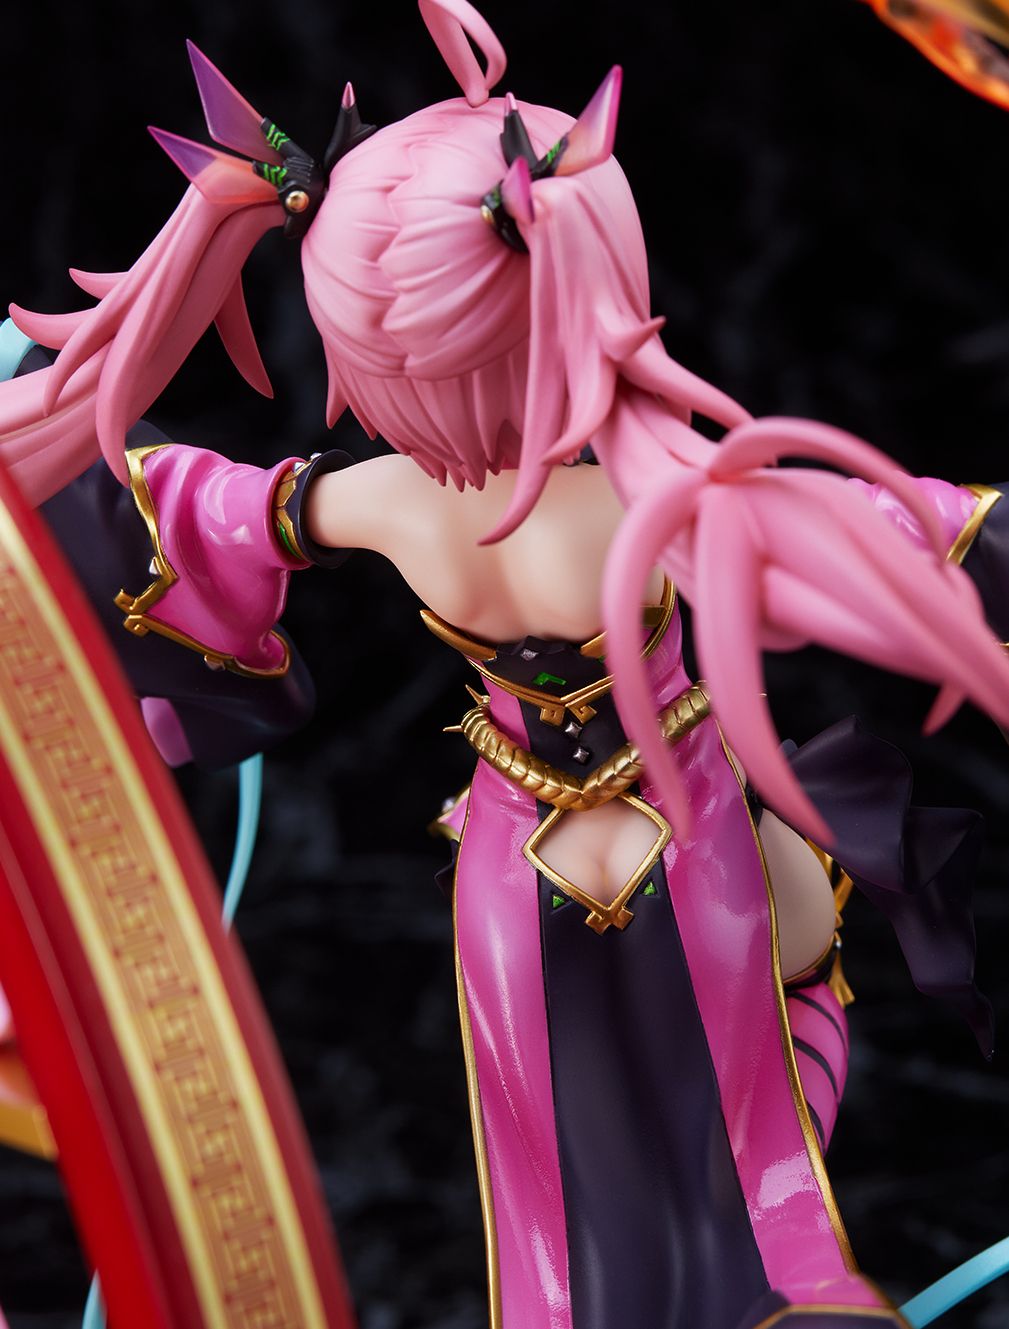 That Time I Got Reincarnated as a Slime Milim Nava -Ravenous Wolf Ver.- 1/7th Scale Figure | animota